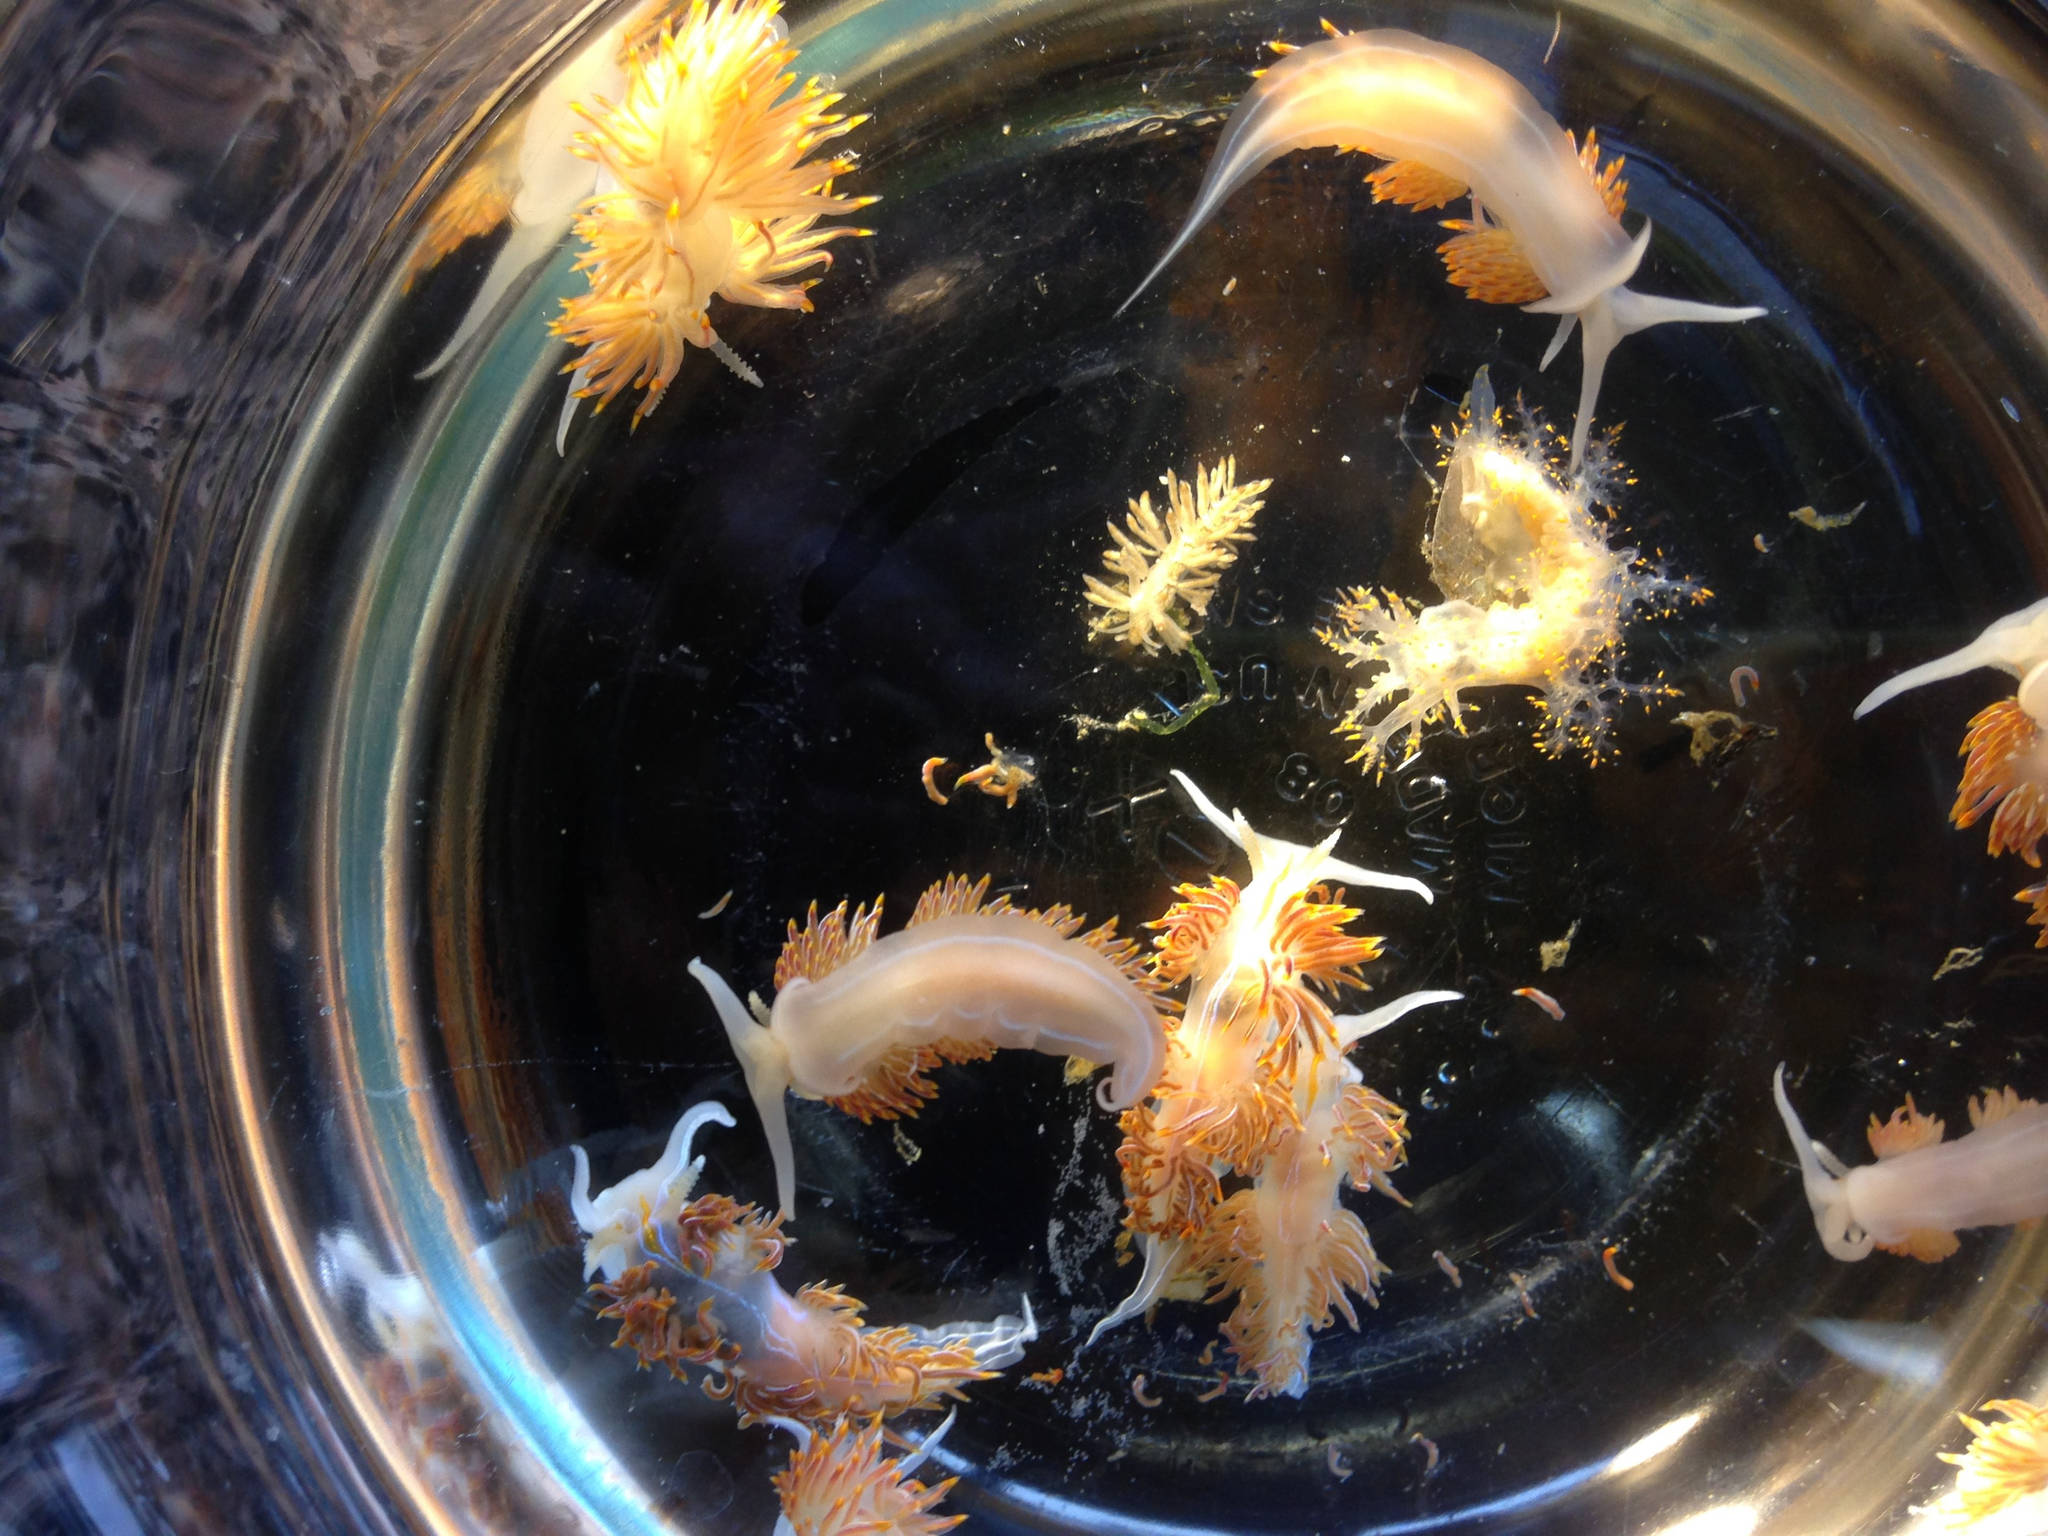 This April 2015 photo shows marine sea slugs from a derelict vessel from Iwate Prefecture, Japan which washed ashore in Oregon. On Thursday, Sept. 27, 2017, researchers reported nearly 300 species of fish, mussels and other sea creatures hitchhiked across the Pacific Ocean on debris from the 2011 Japanese tsunami, washing ashore alive in the United States. (John W. Chapman)